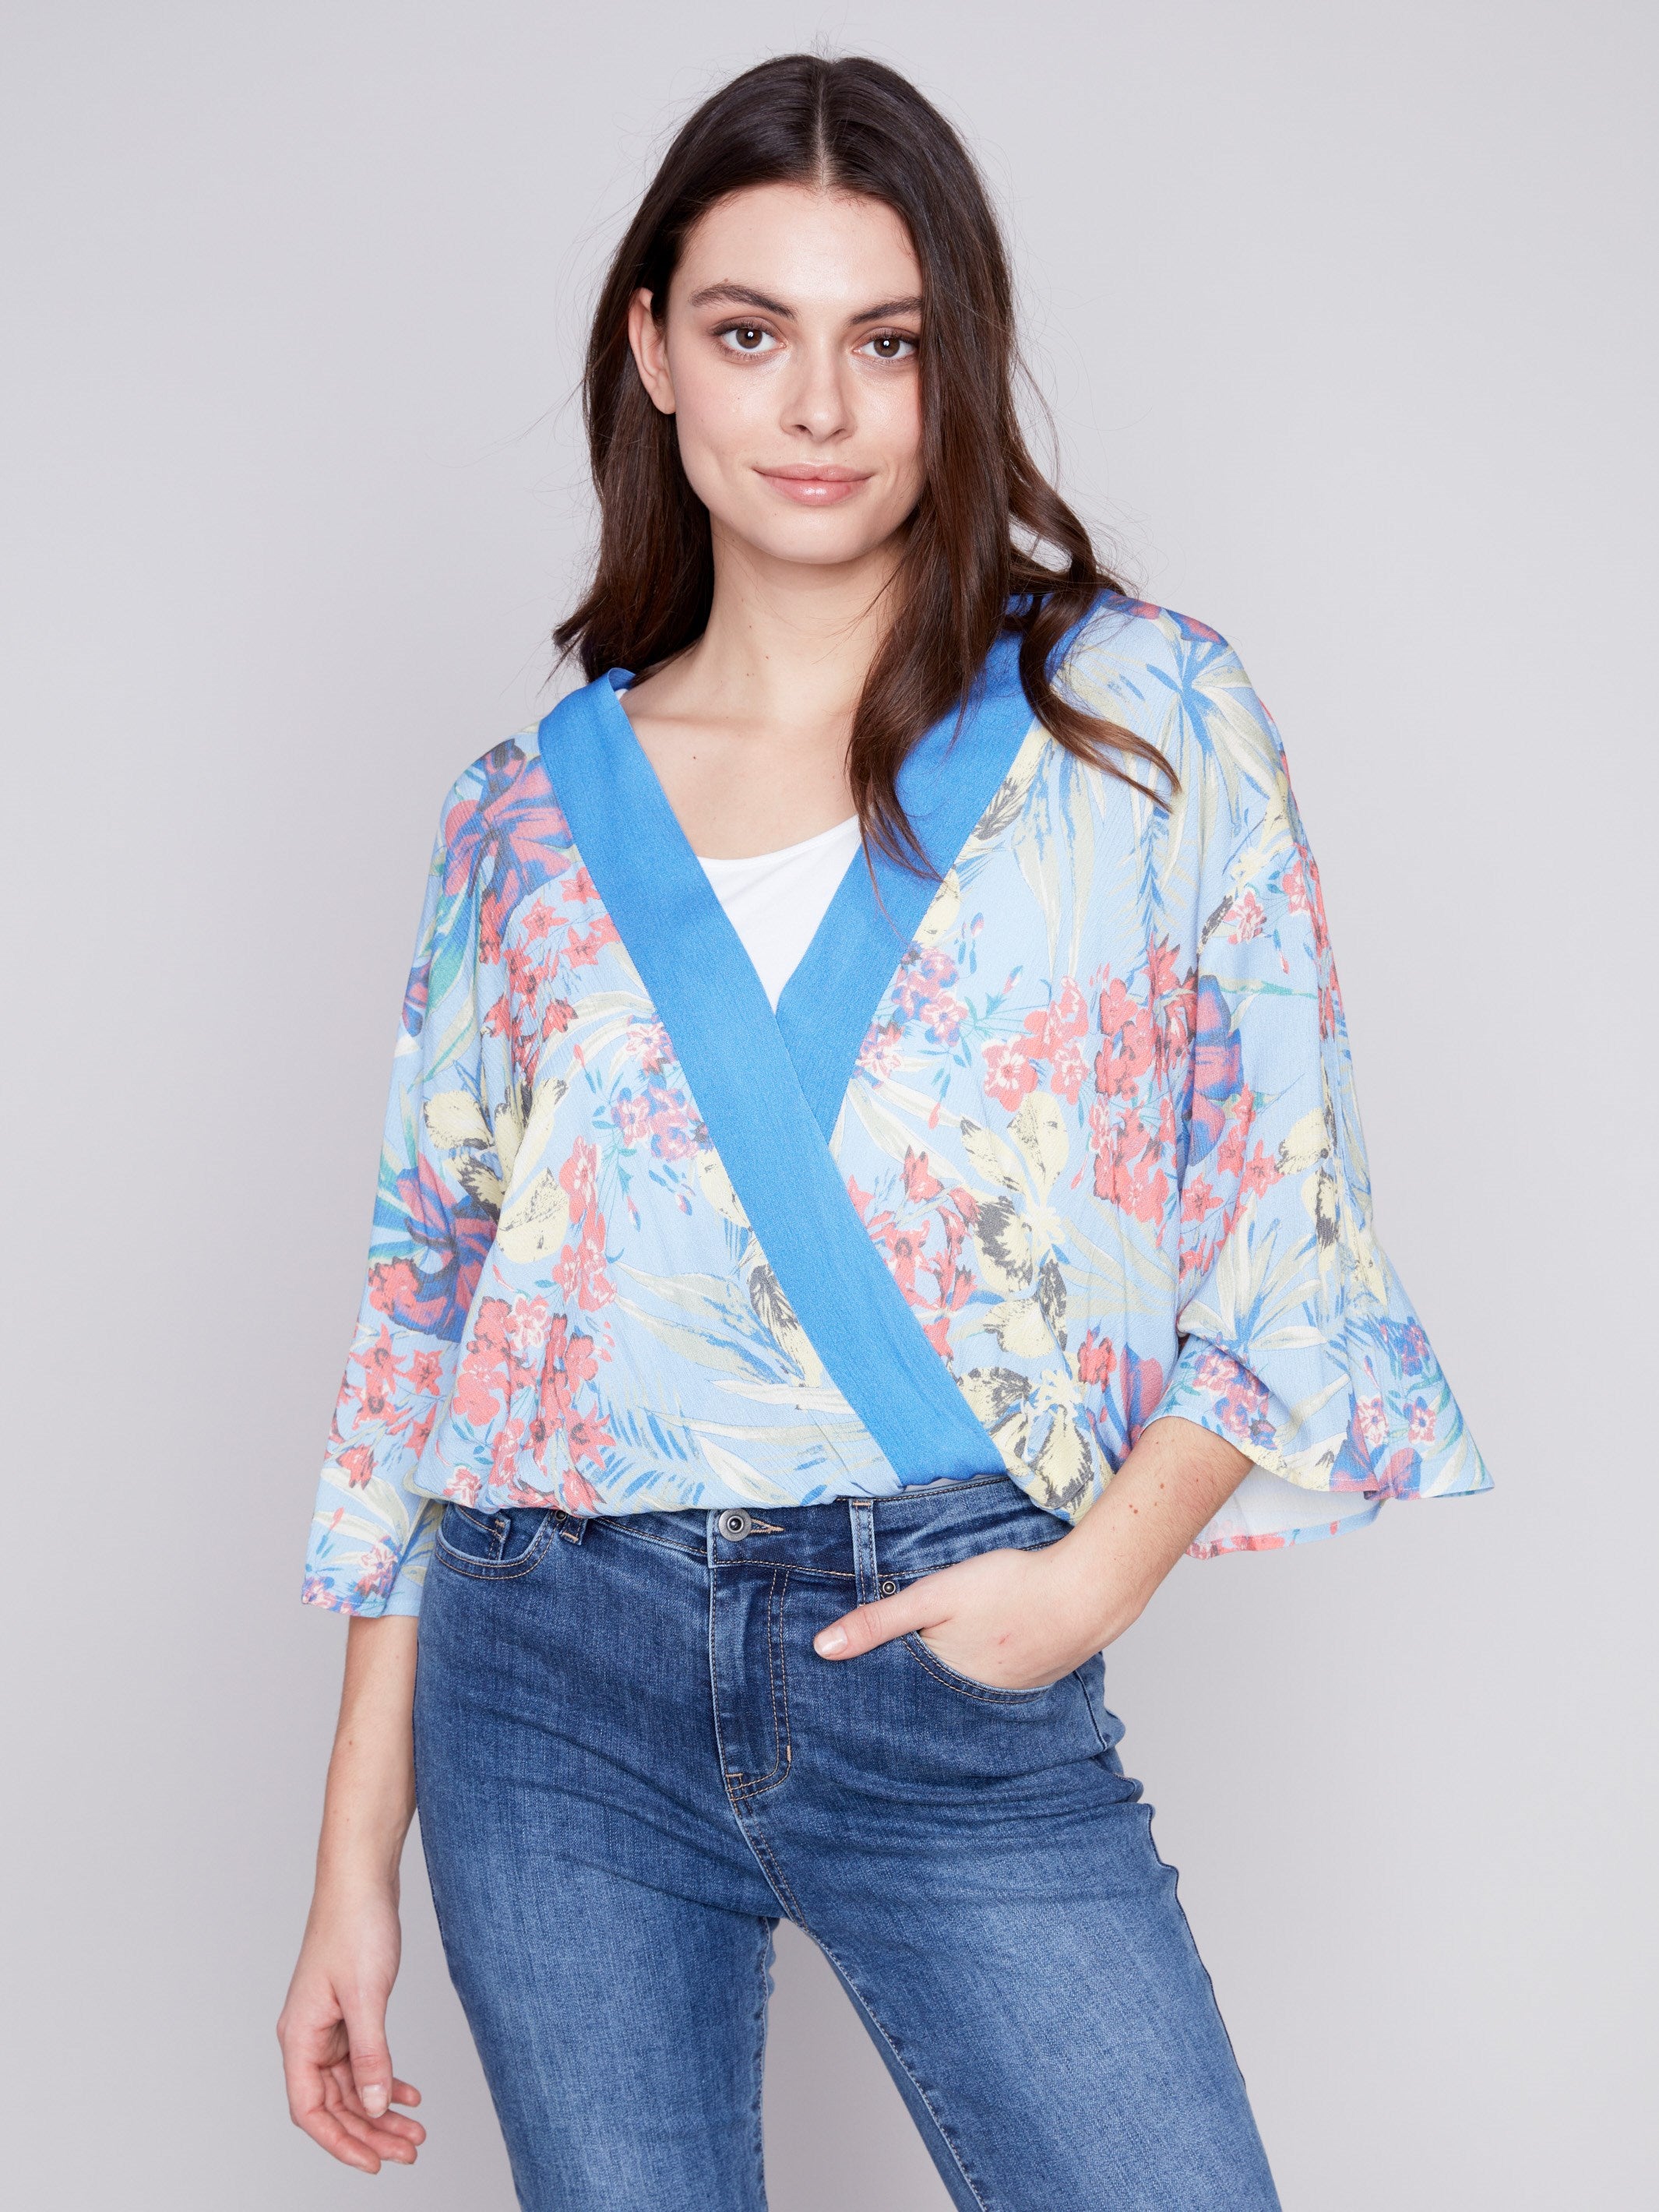 Charlie B Printed Overlap Blouse - Lillypad - Image 1